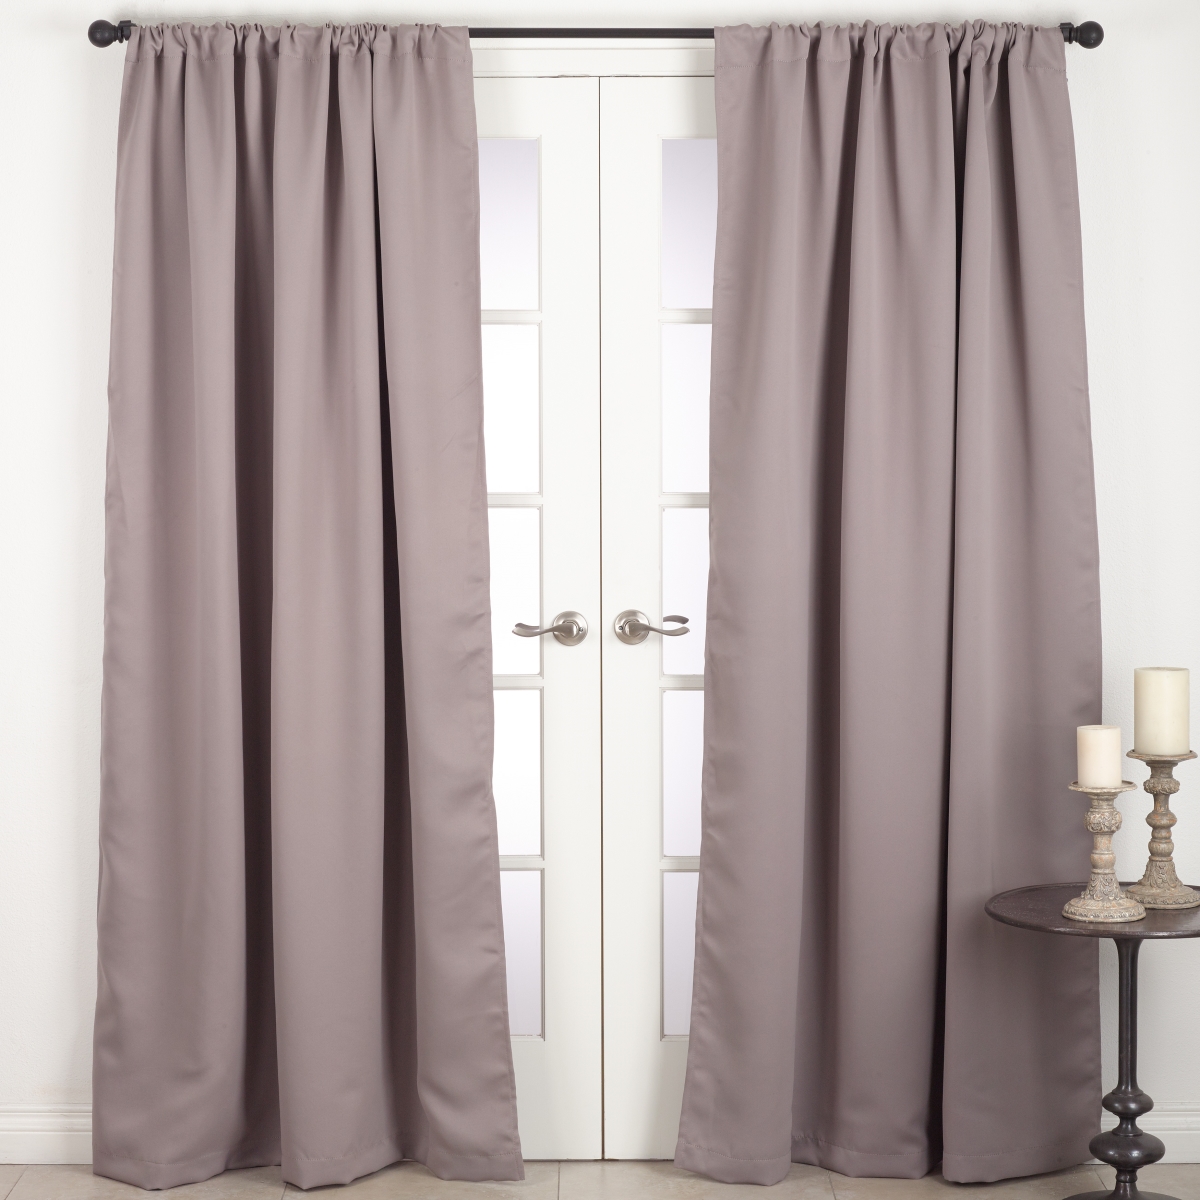 C115.t5484 54 X 84 In. Solid Rod Pocket Blackout Window Curtain Panel, Taupe